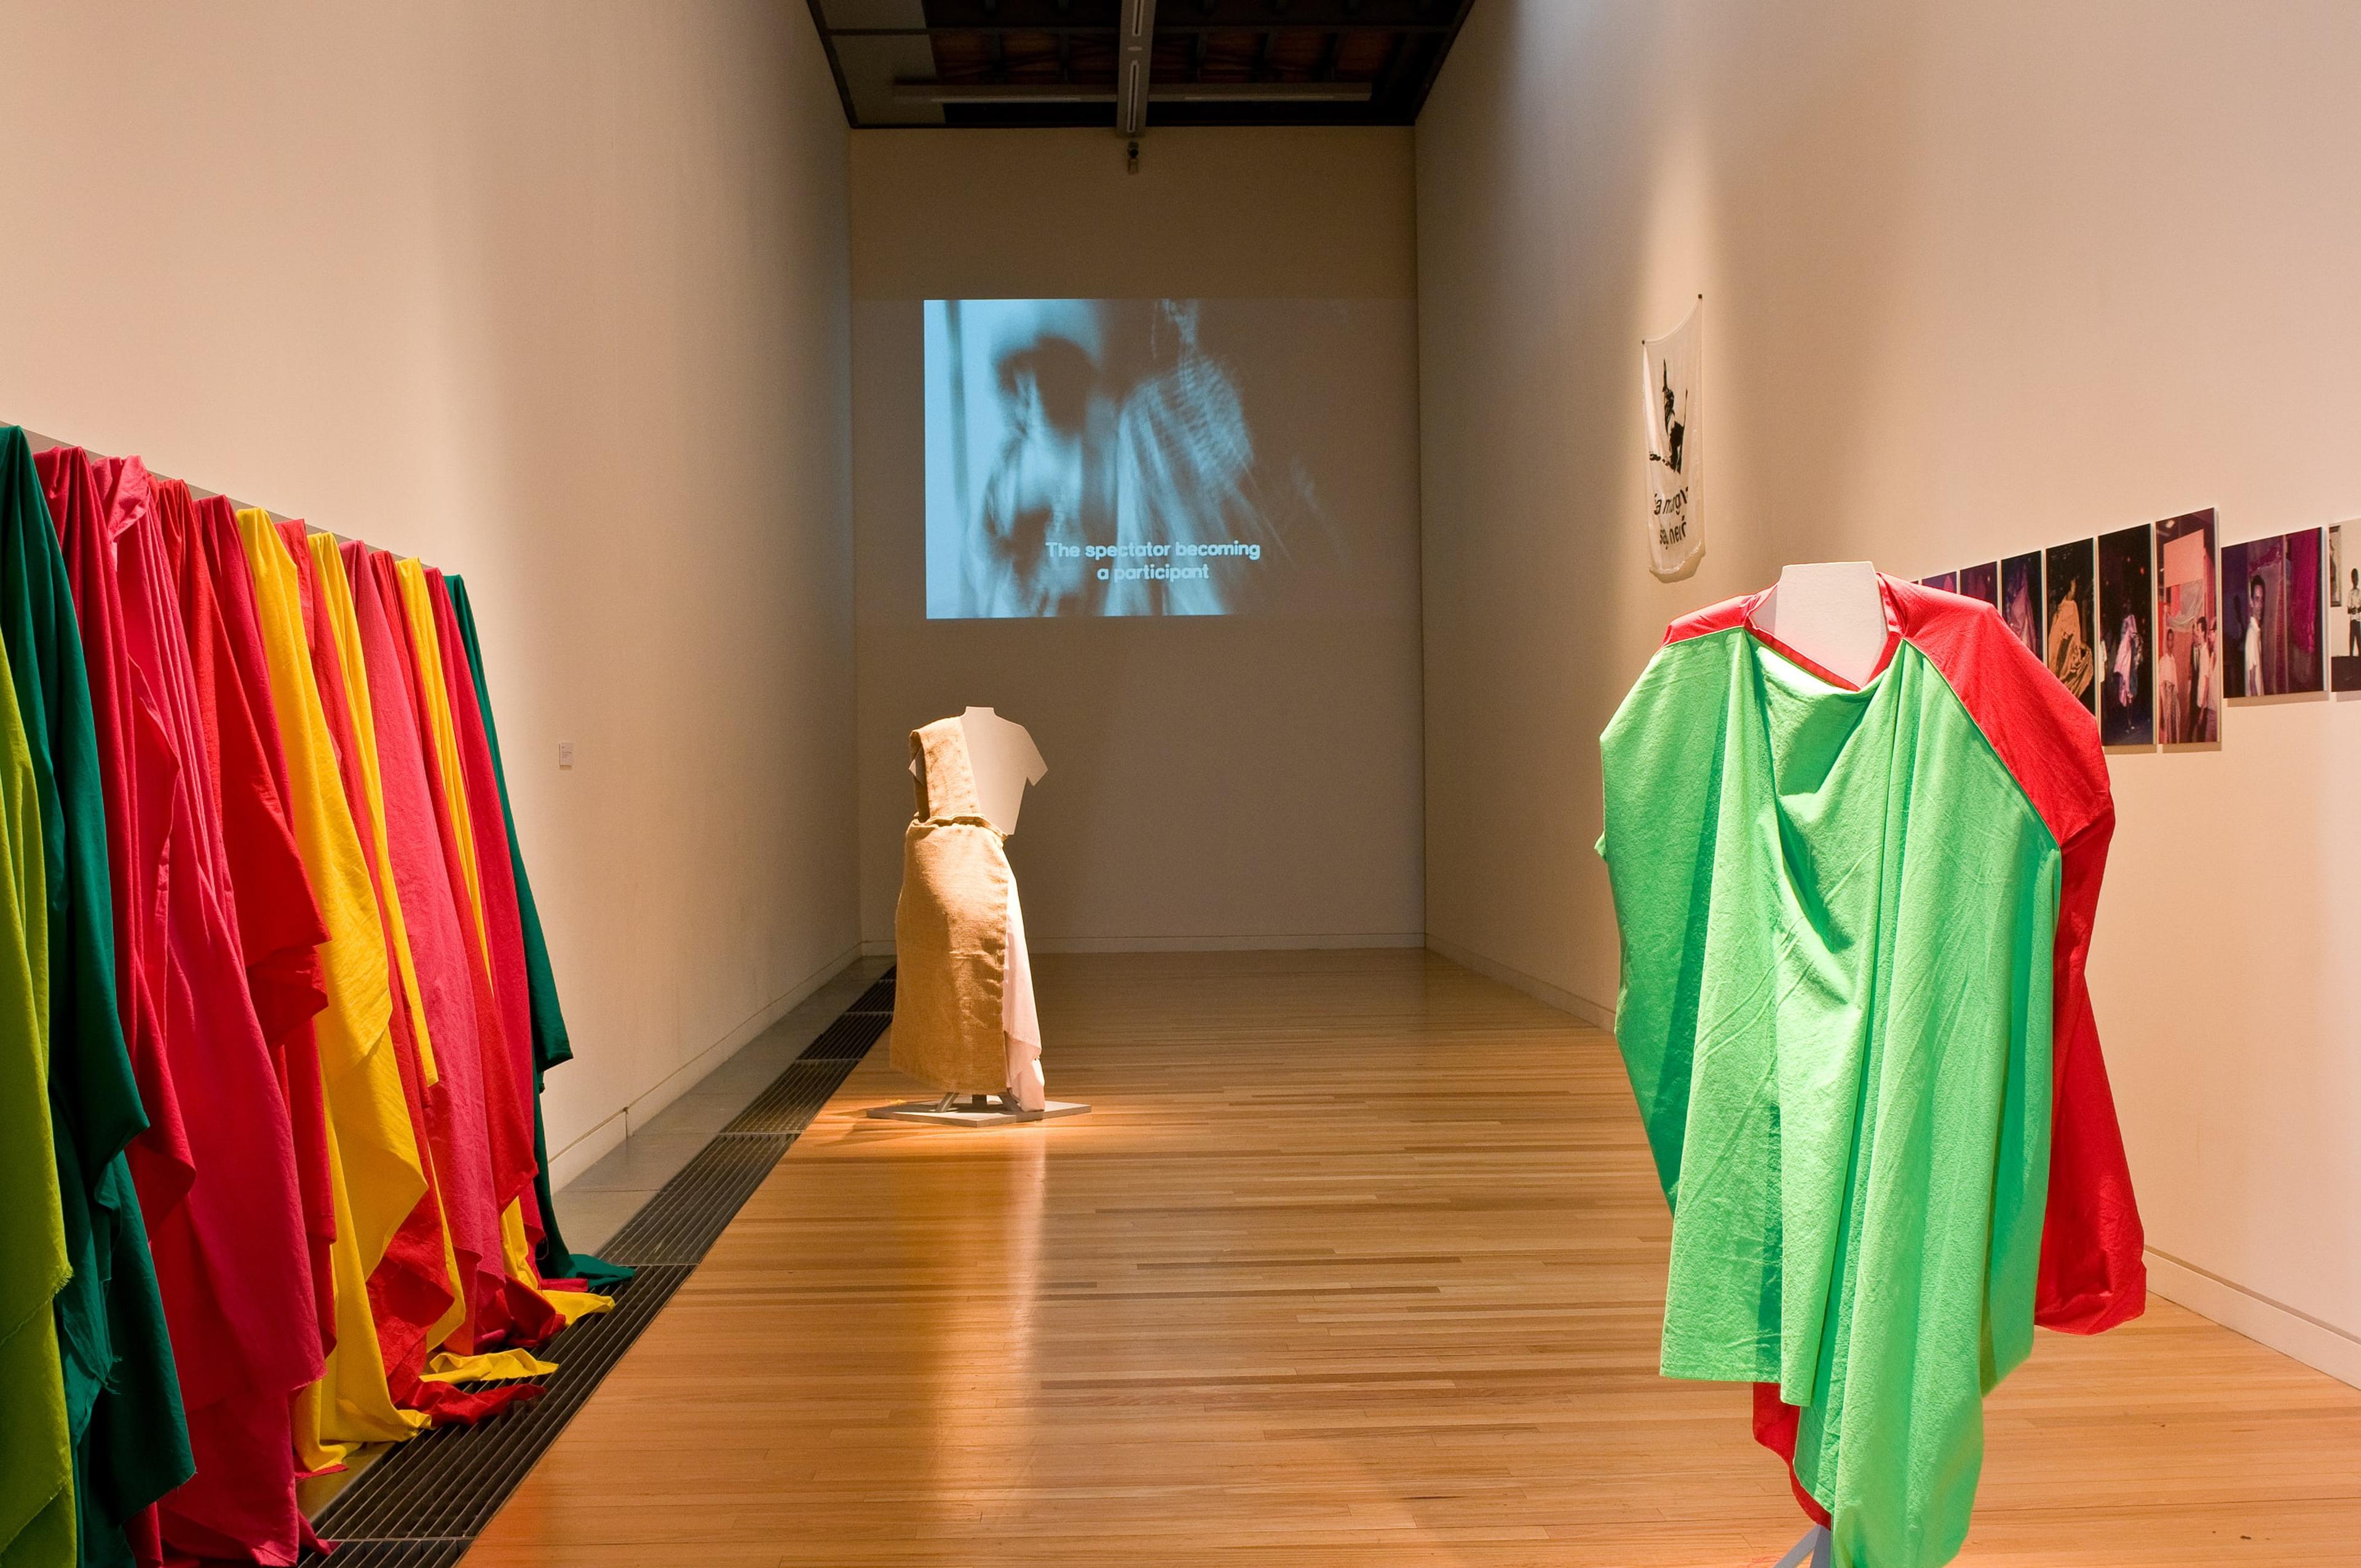 Points of Contact installation works by Helio Oiticica